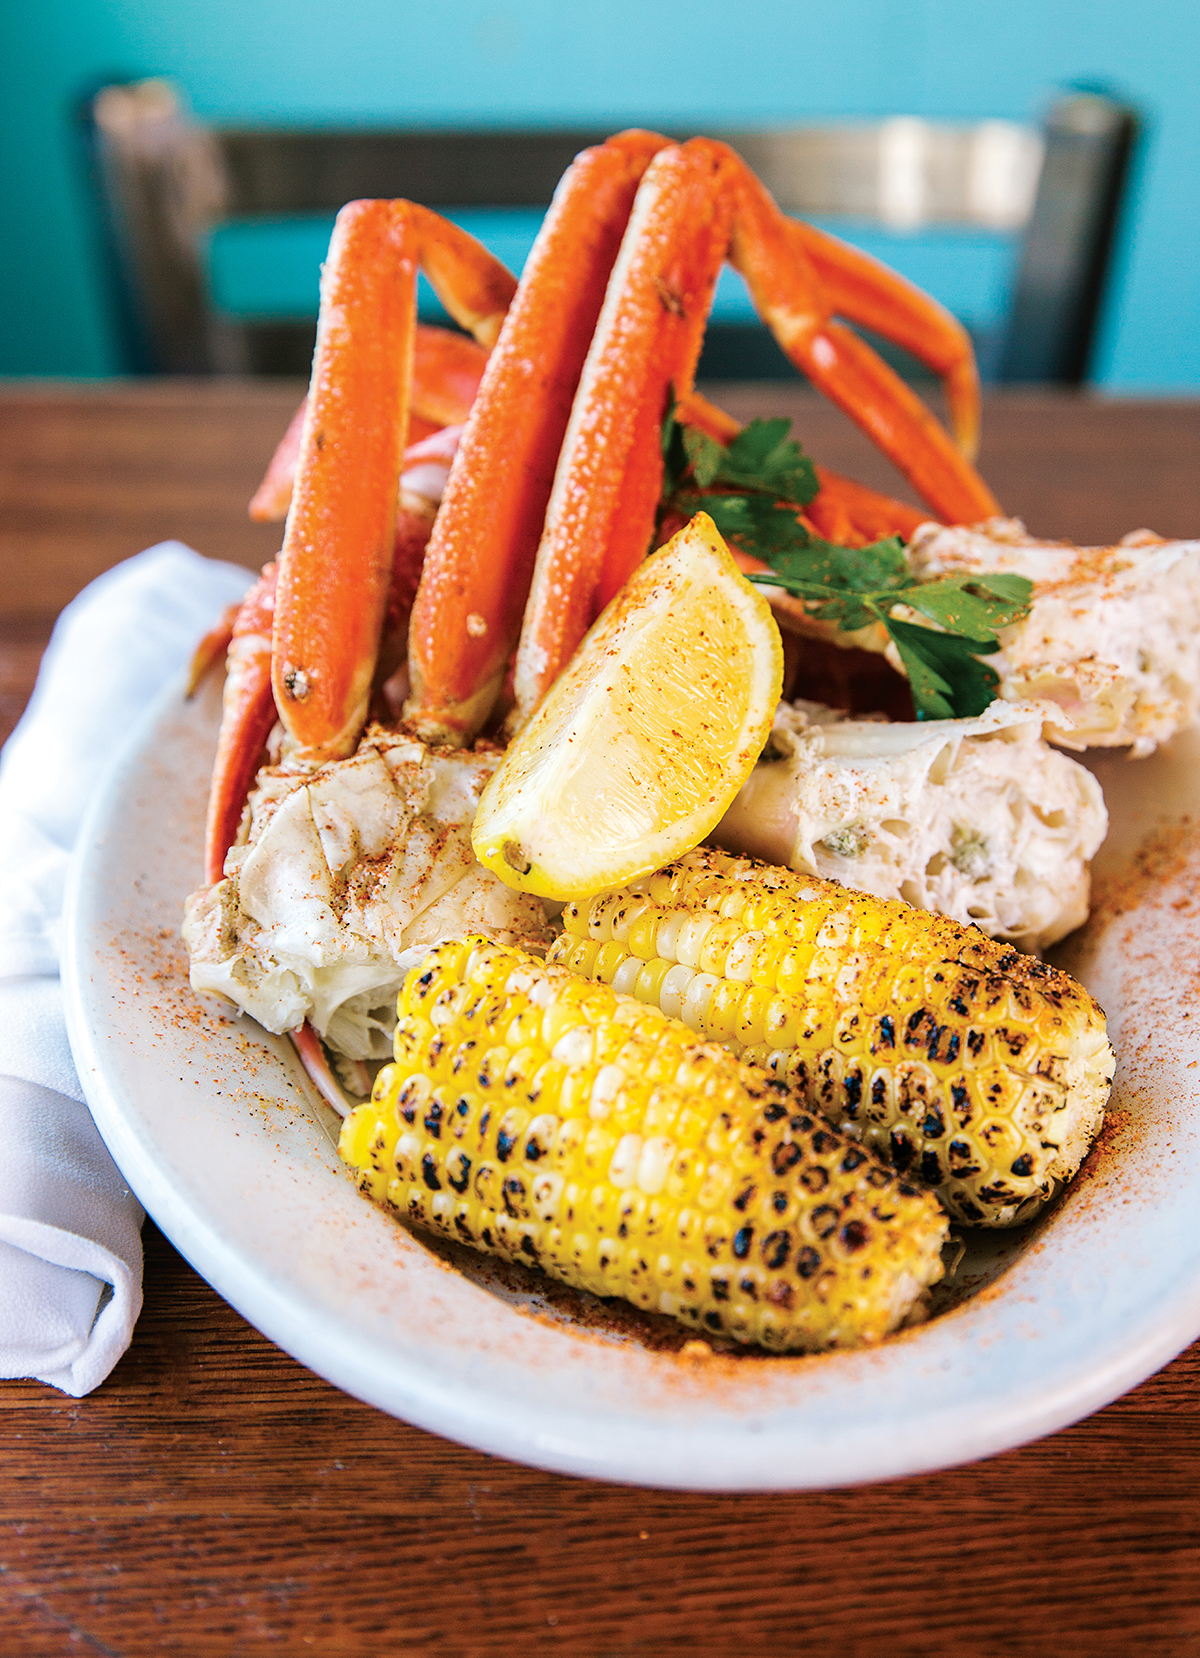 20 Seafood Restaurants for 20 Occasions in Greater Boston